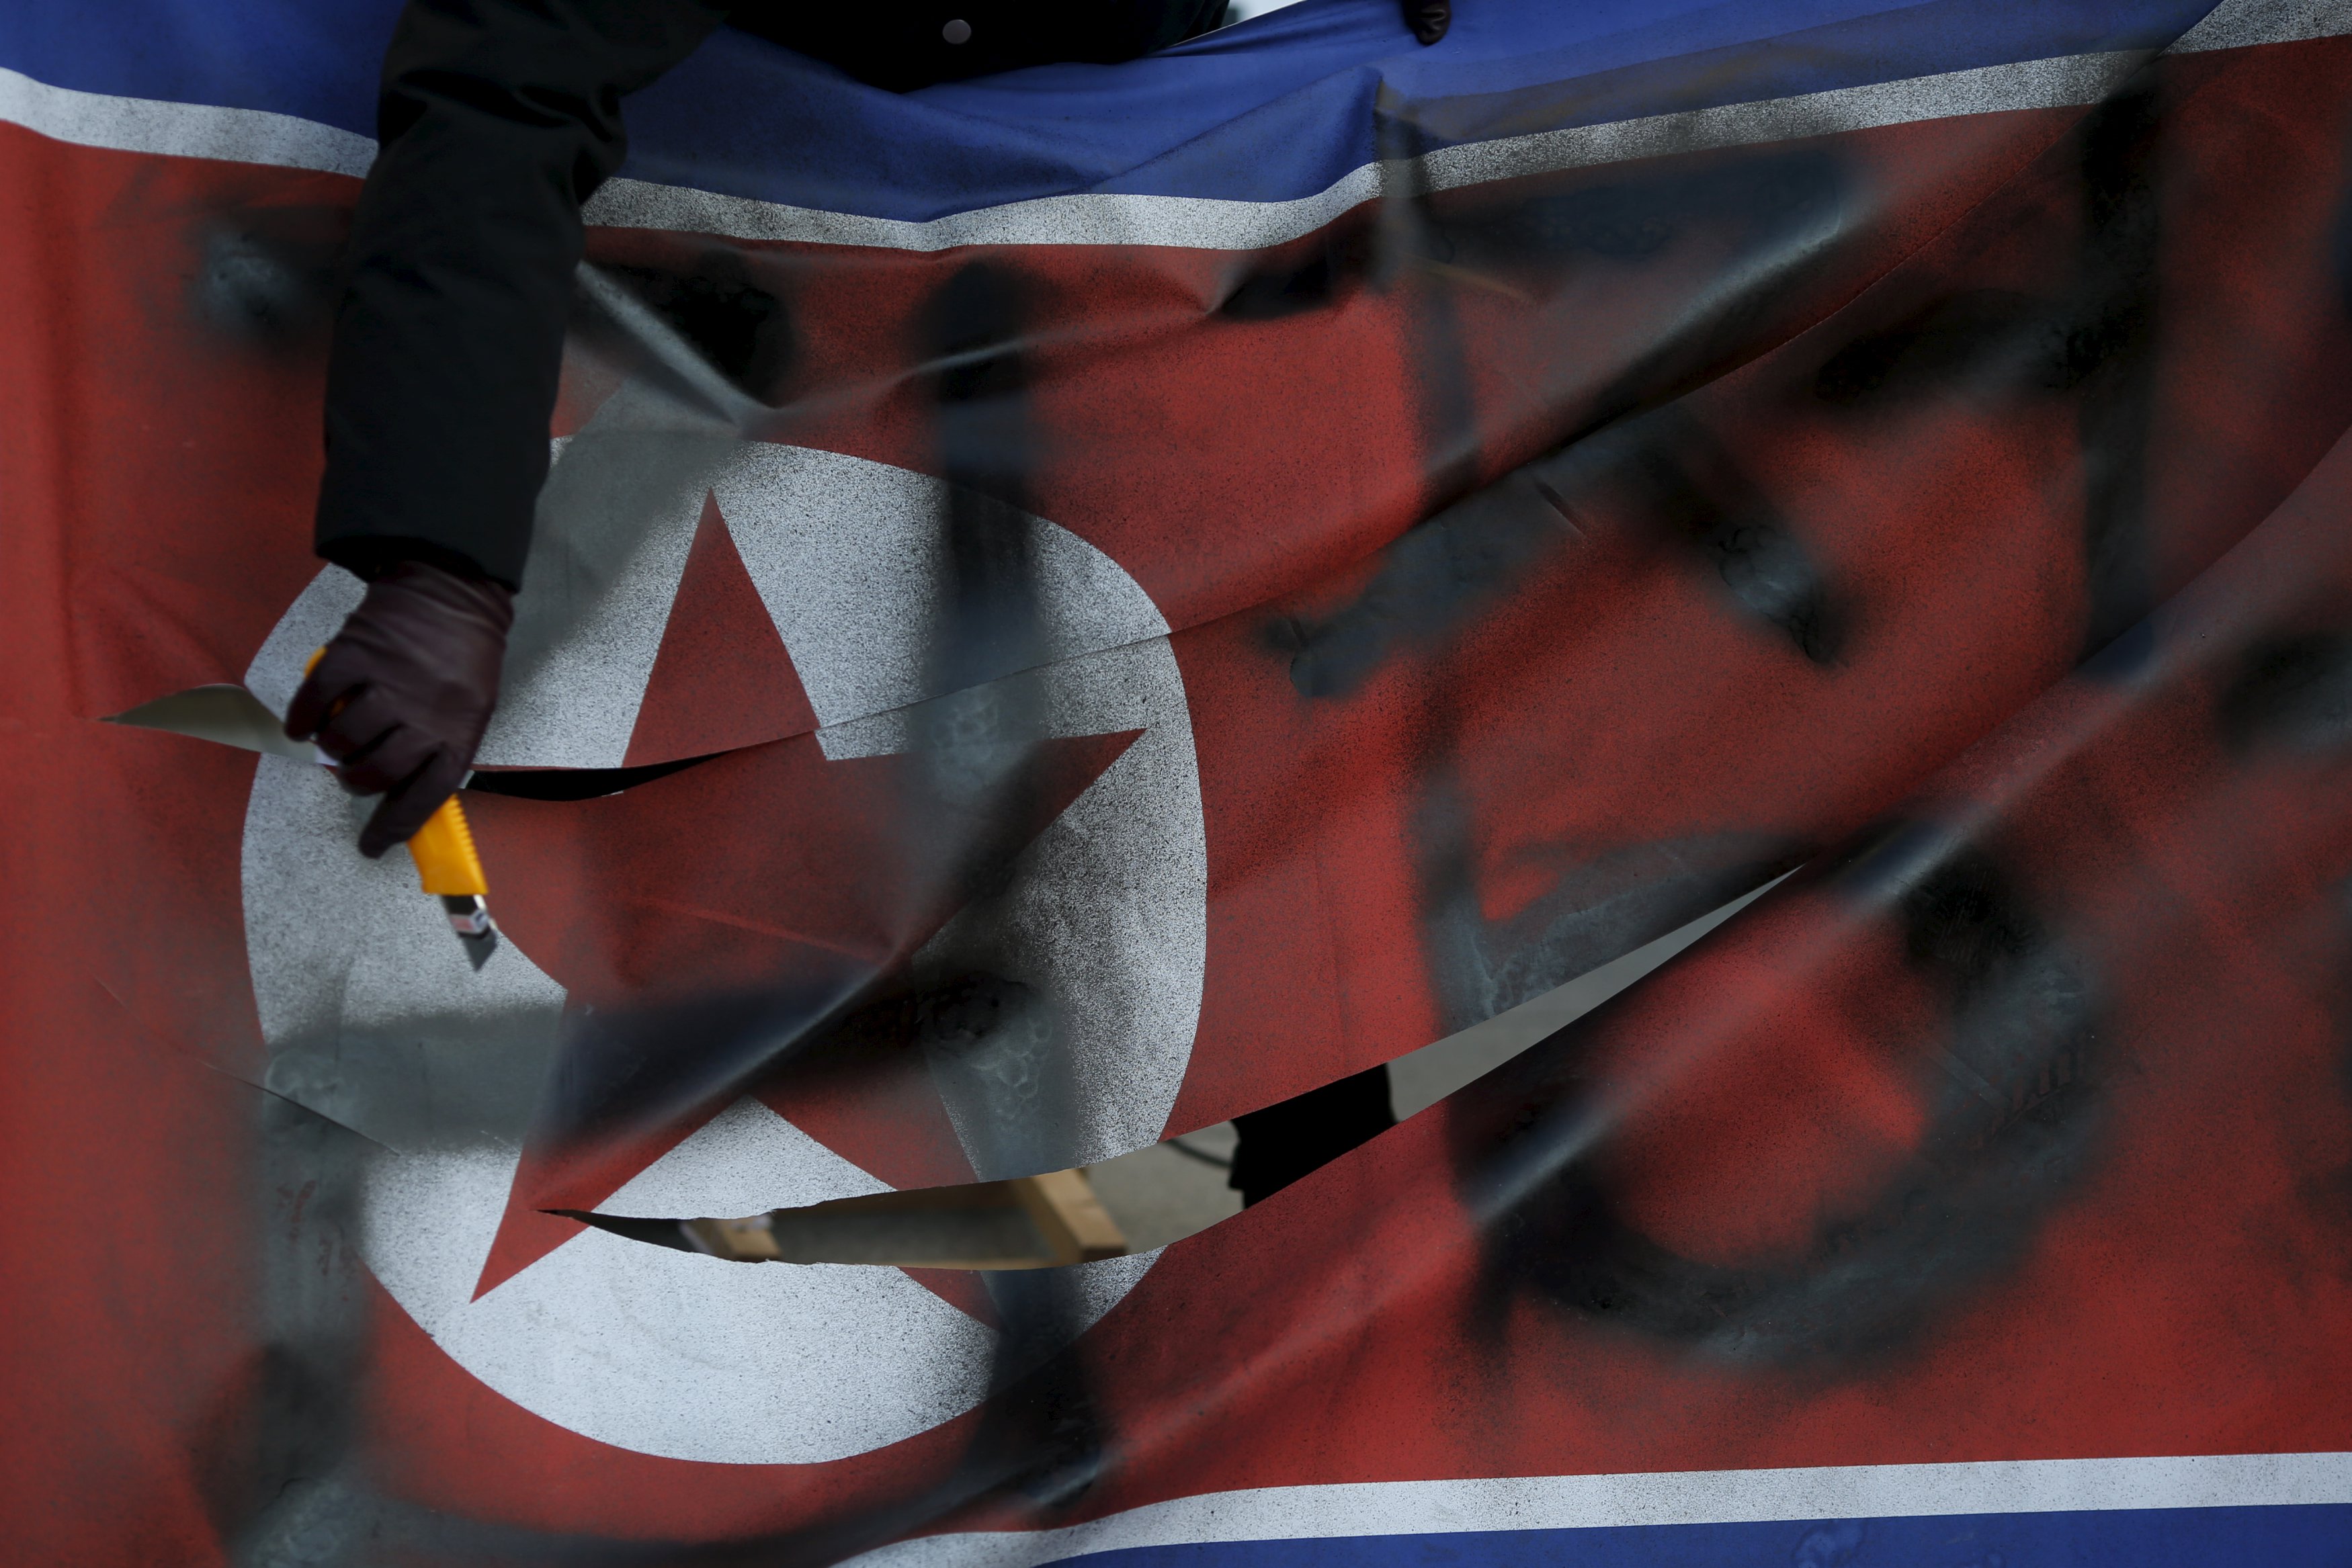 A protester cuts a defaced North Korean flag during an anti-North Korea rally in central Seoul, South Korea, January 7, 2016. REUTERS/Kim Hong-Ji